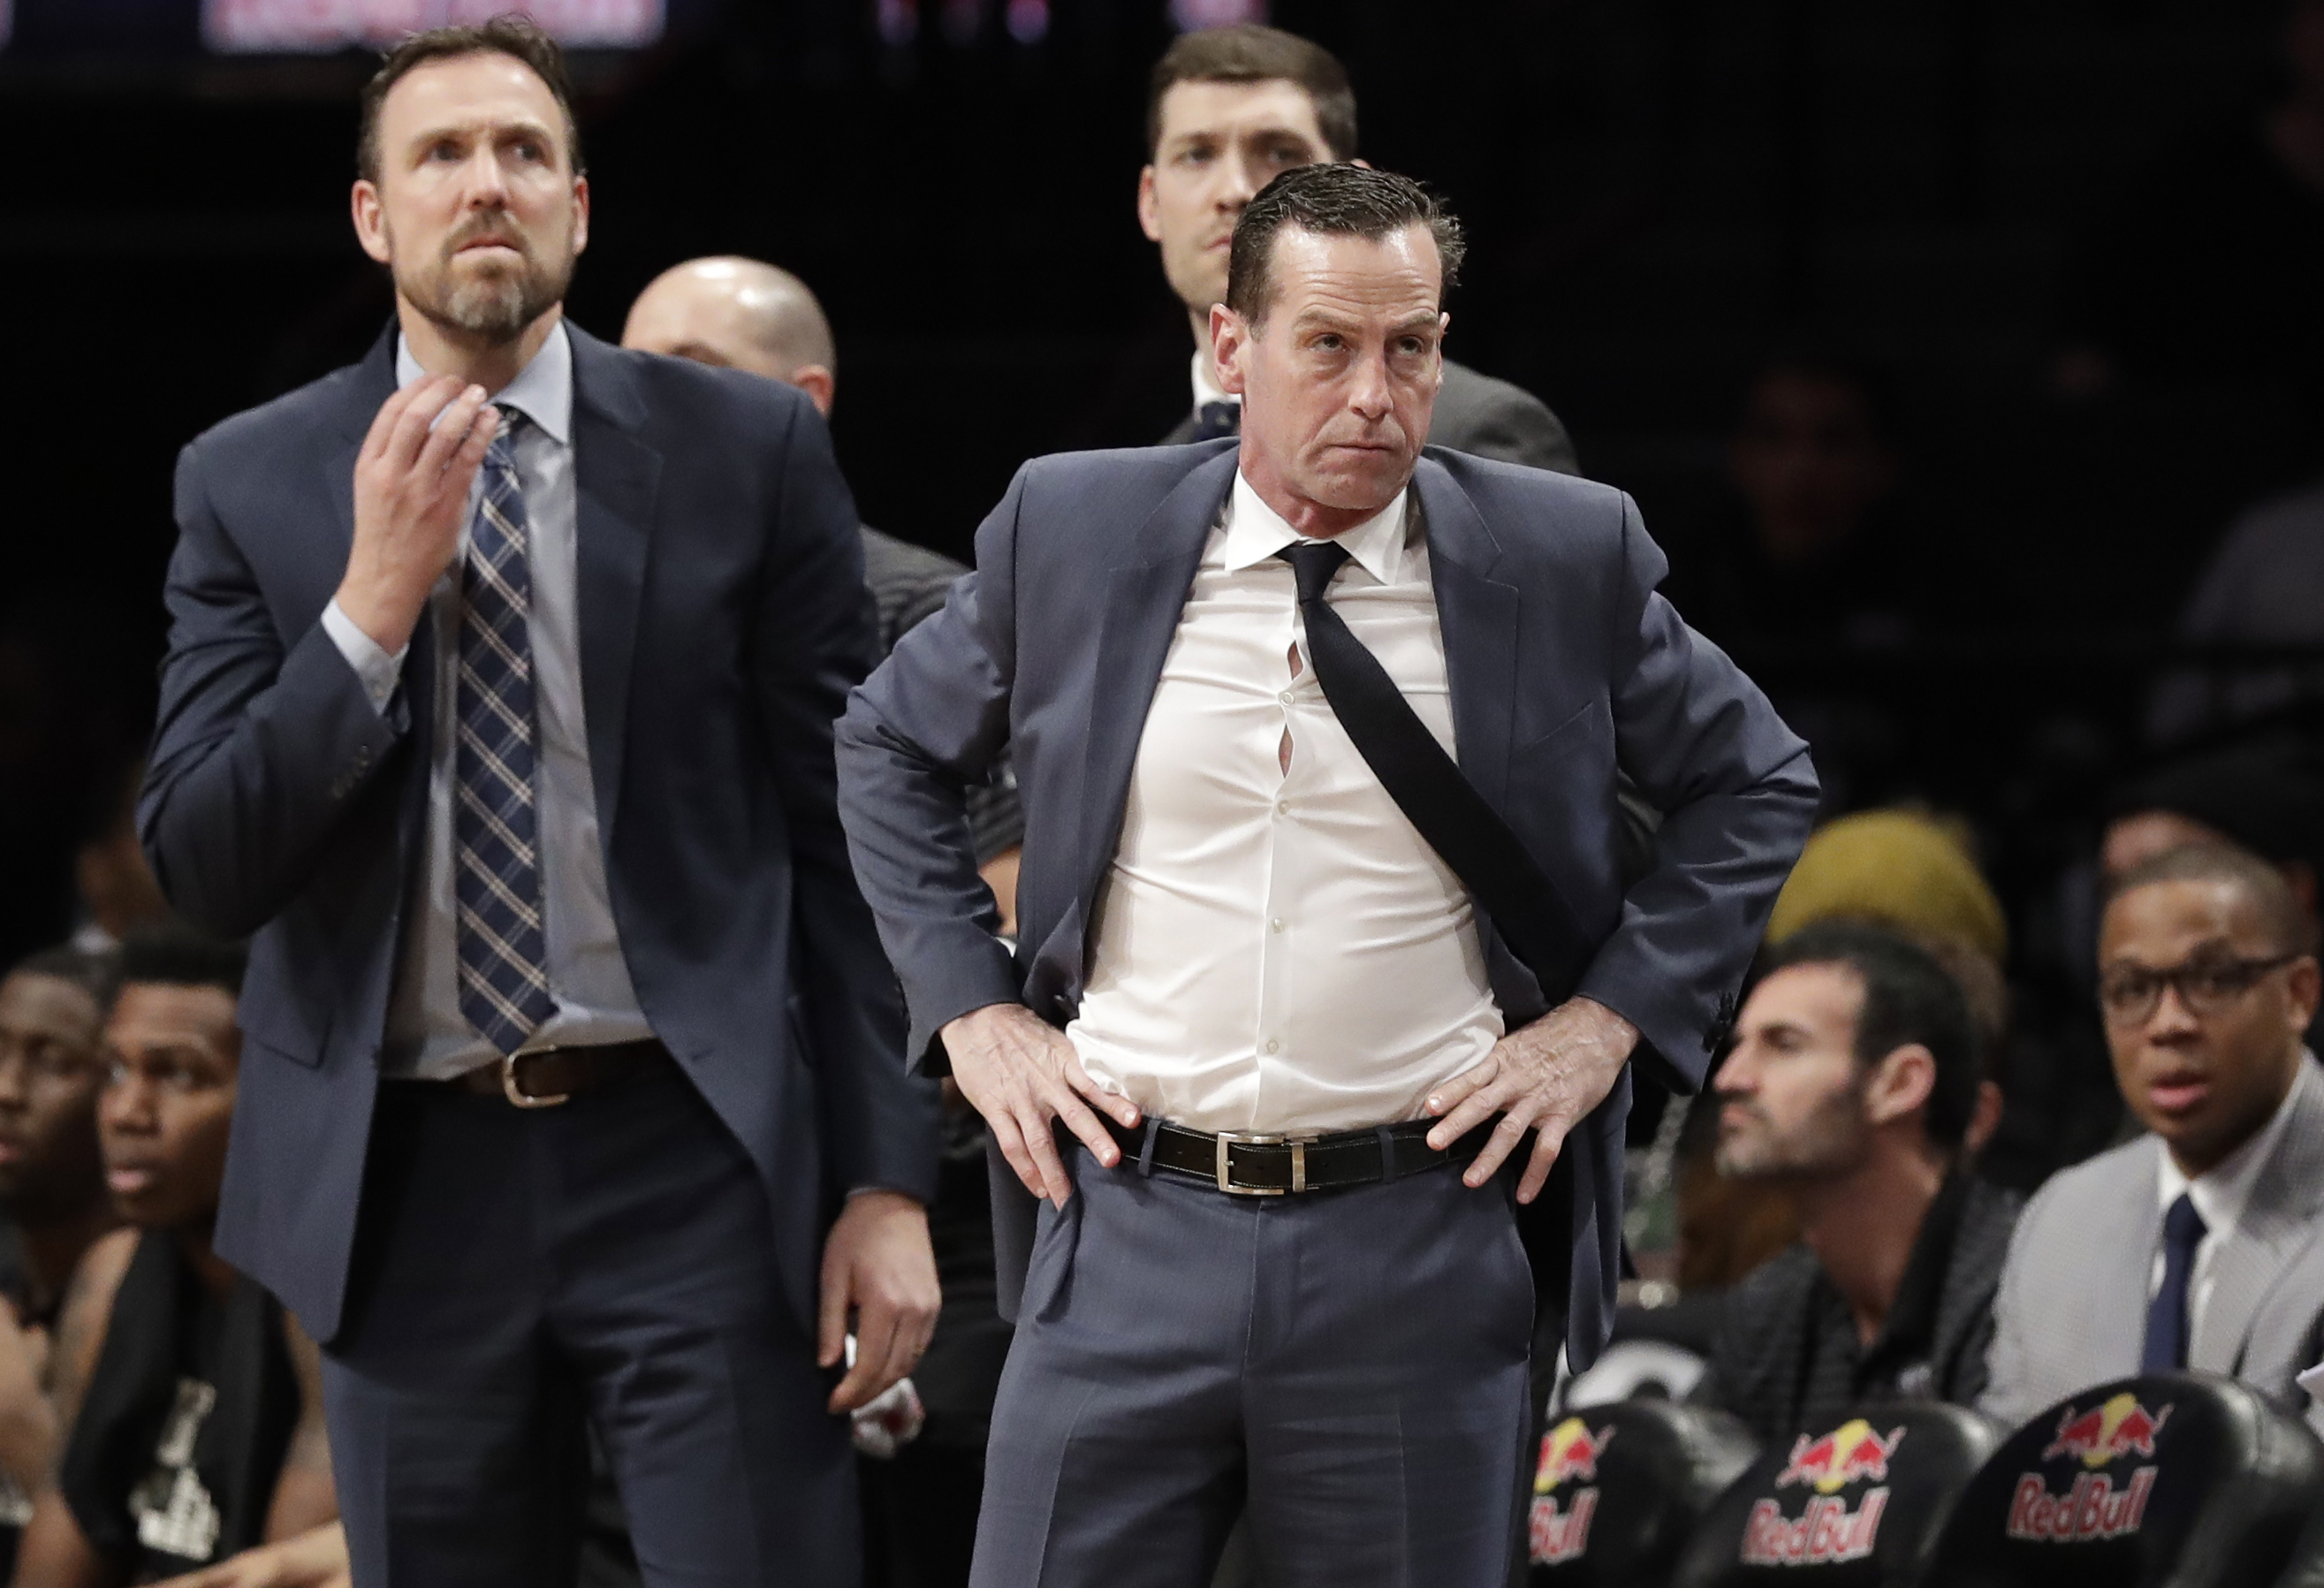 Head coach Kenny Atkinson could hardly believe what he was seeing Wednesday night at Downtown’s Barclays as the Nets suffered a humbling loss to the previously slumping Washington Wizards.(AP Photo/Kathy Willens)